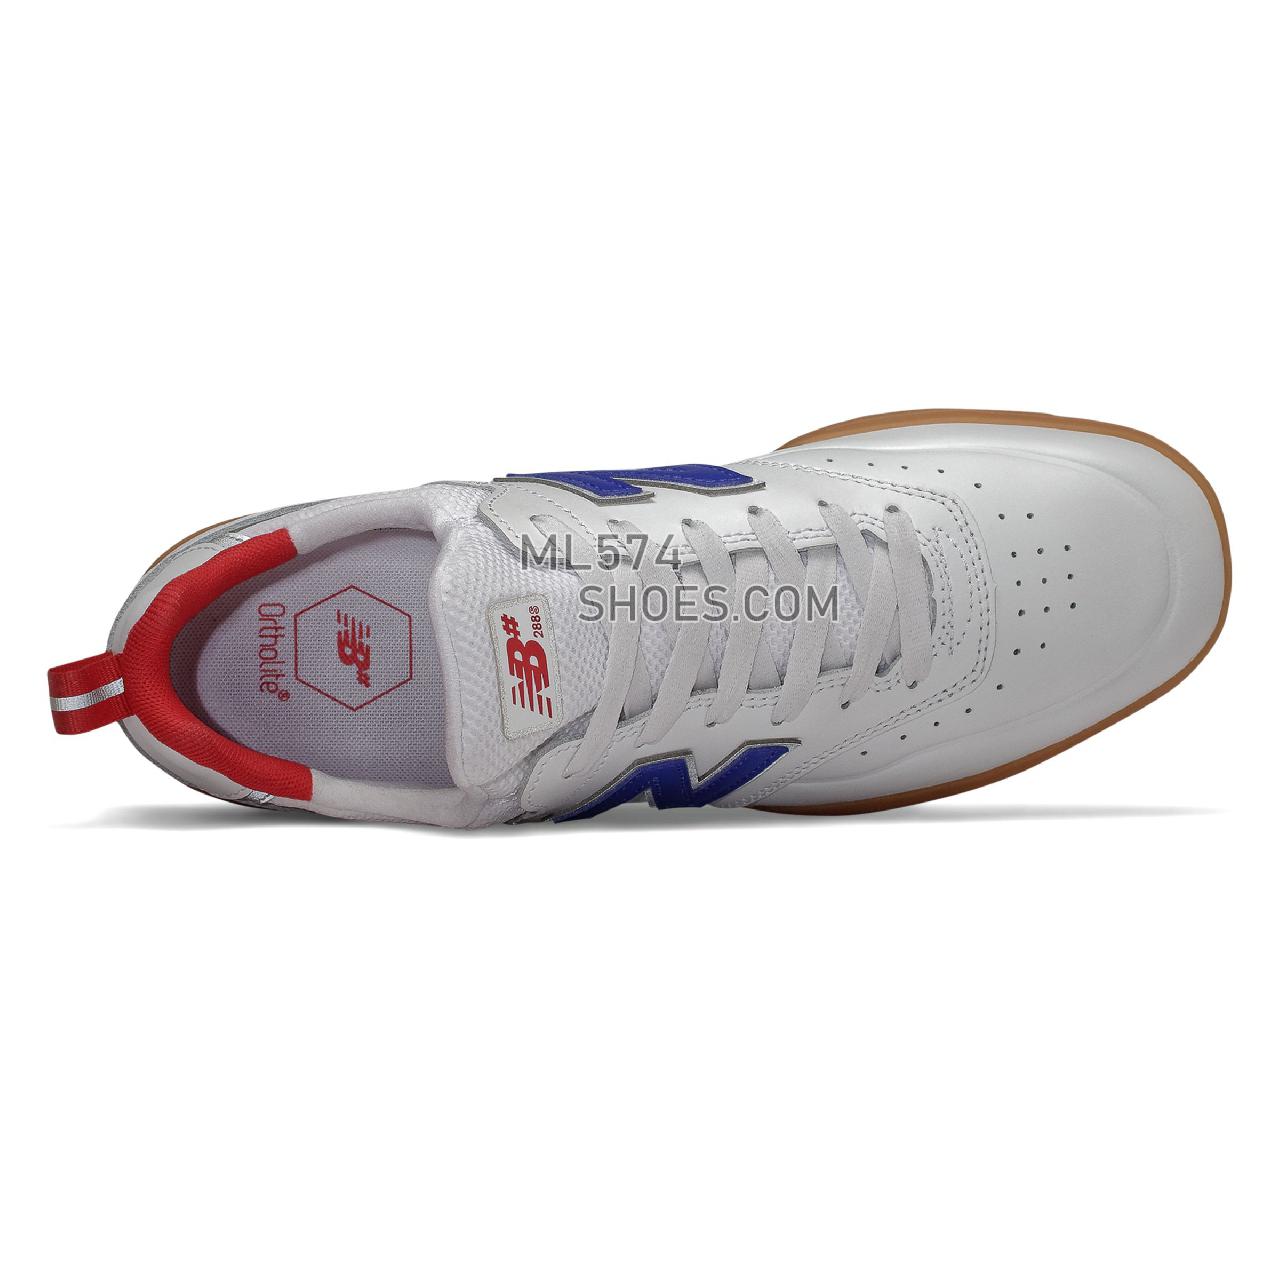 New Balance Numeric 288 Sport - Men's NB Numeric Skate - White with Royal Blue - NM288SWG